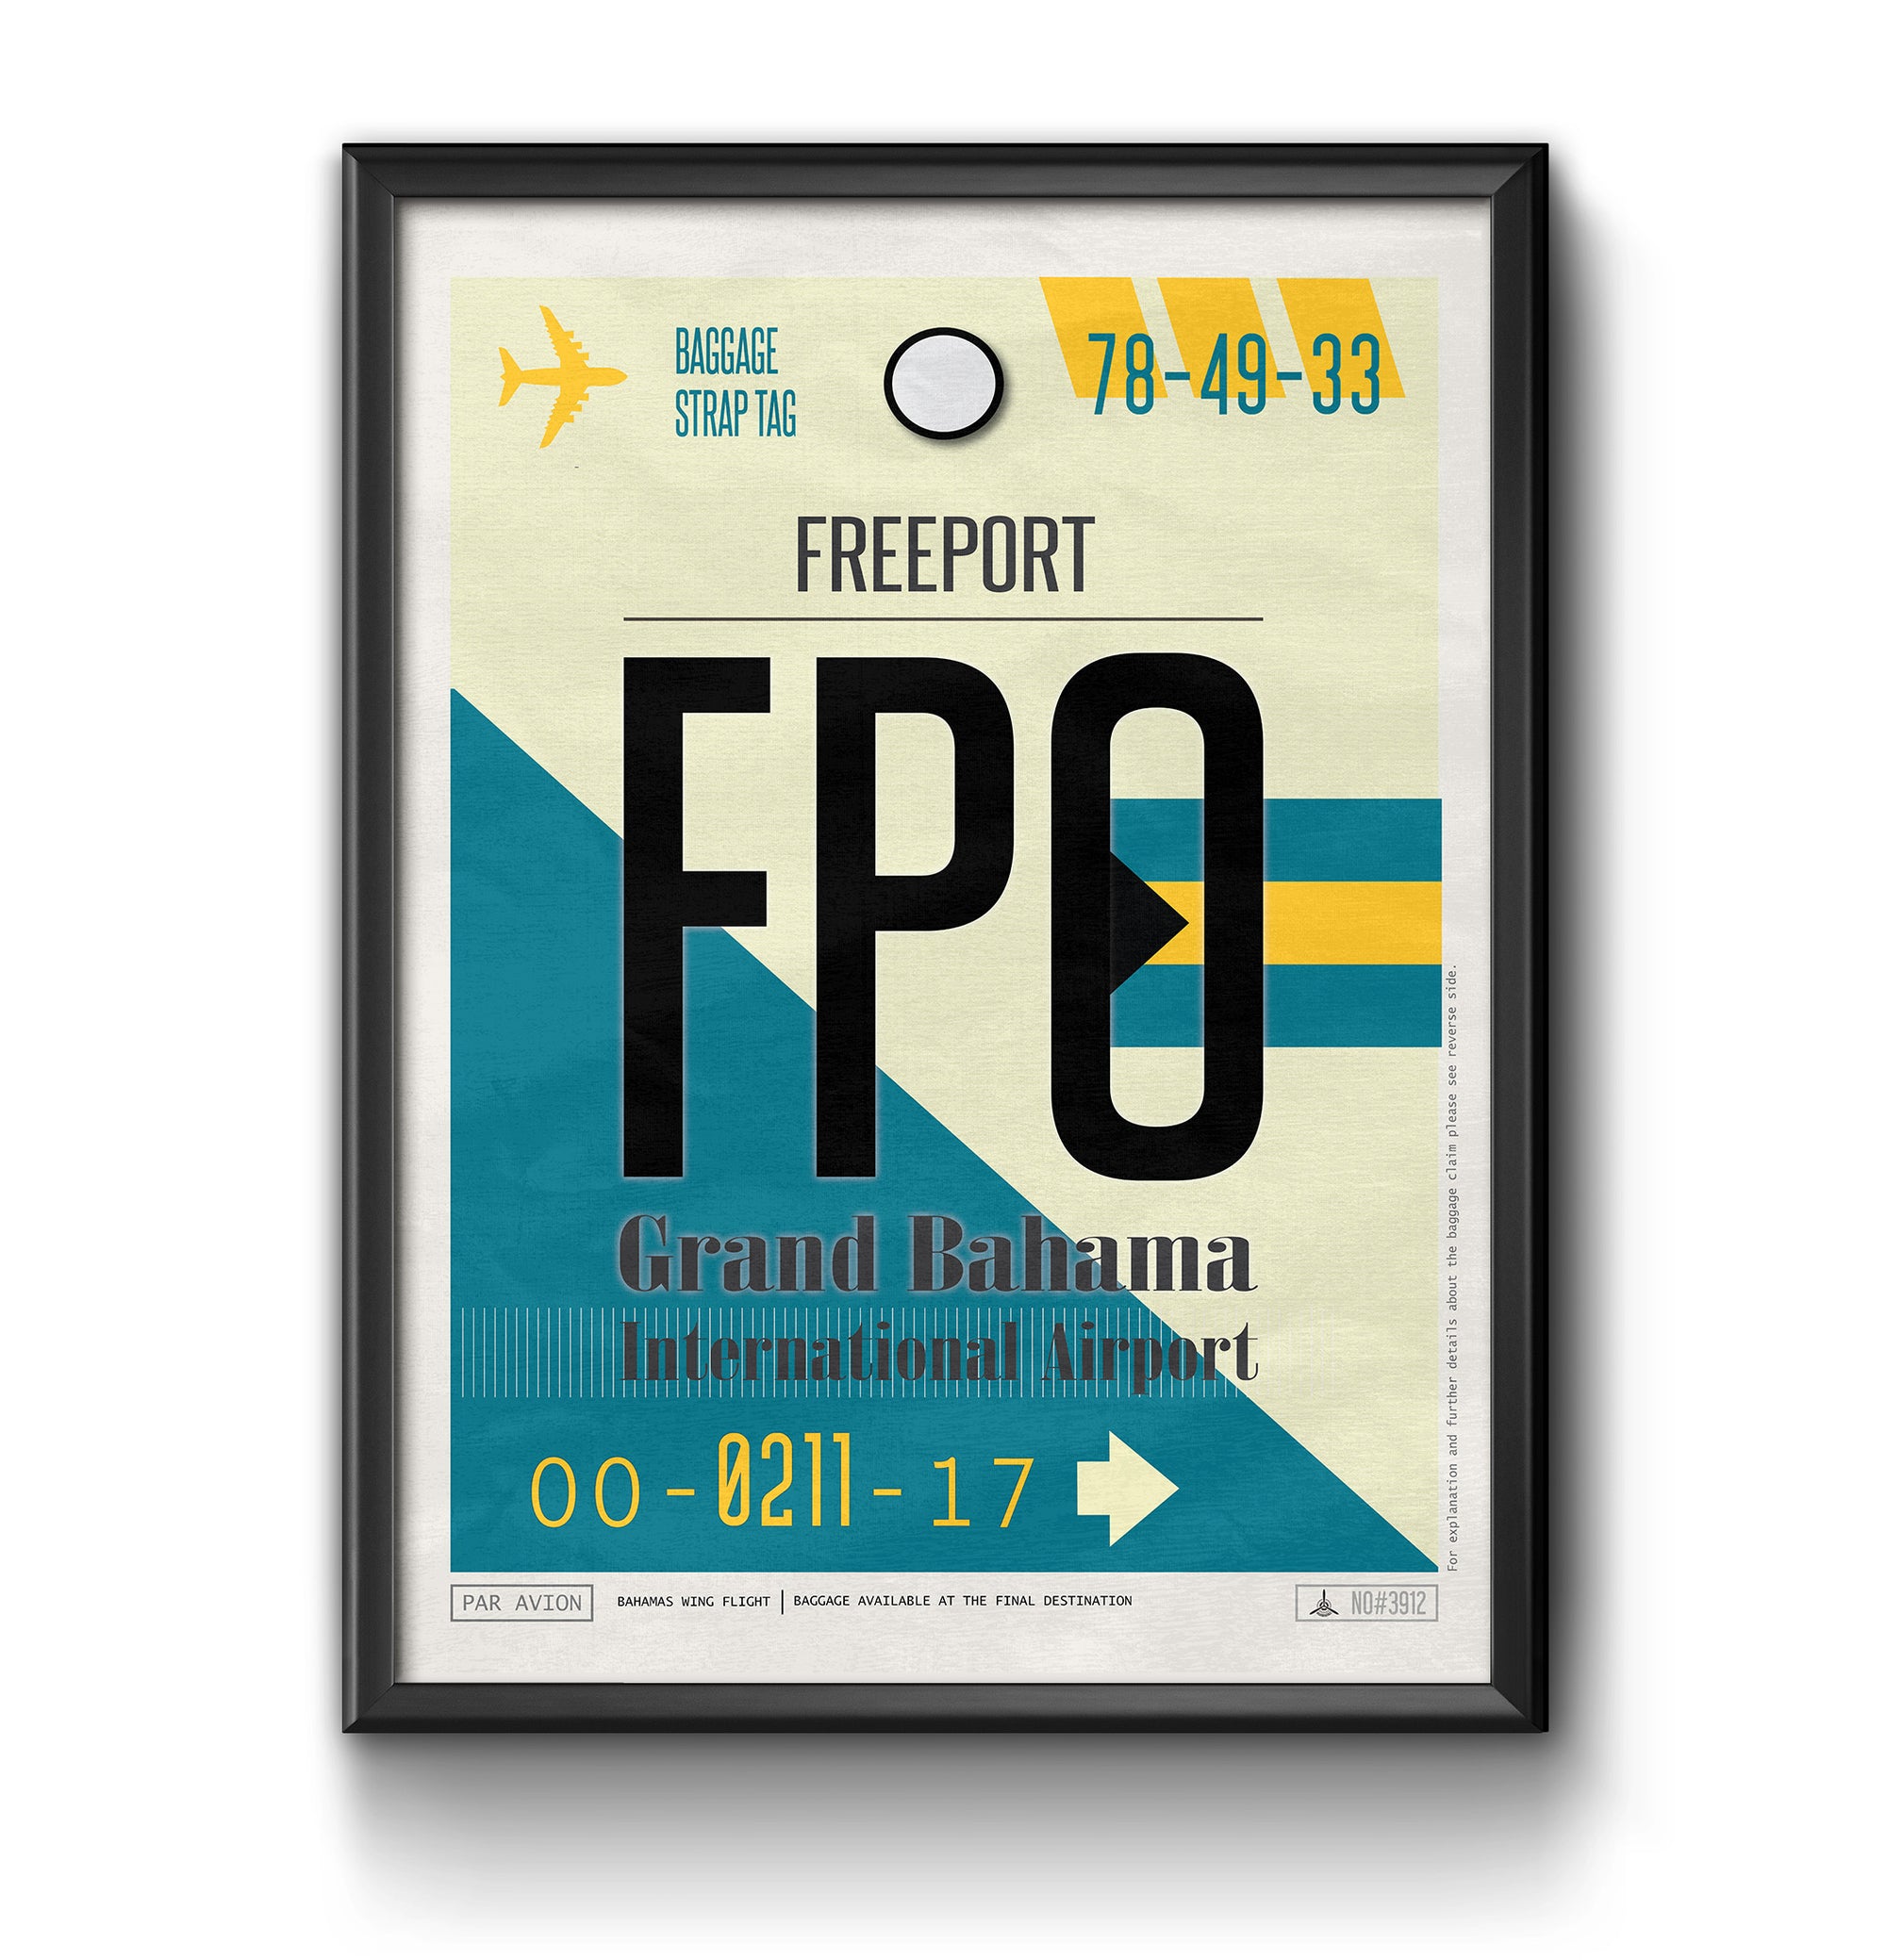 Freeport Grand bahama FPO airport tag poster luggage tag 